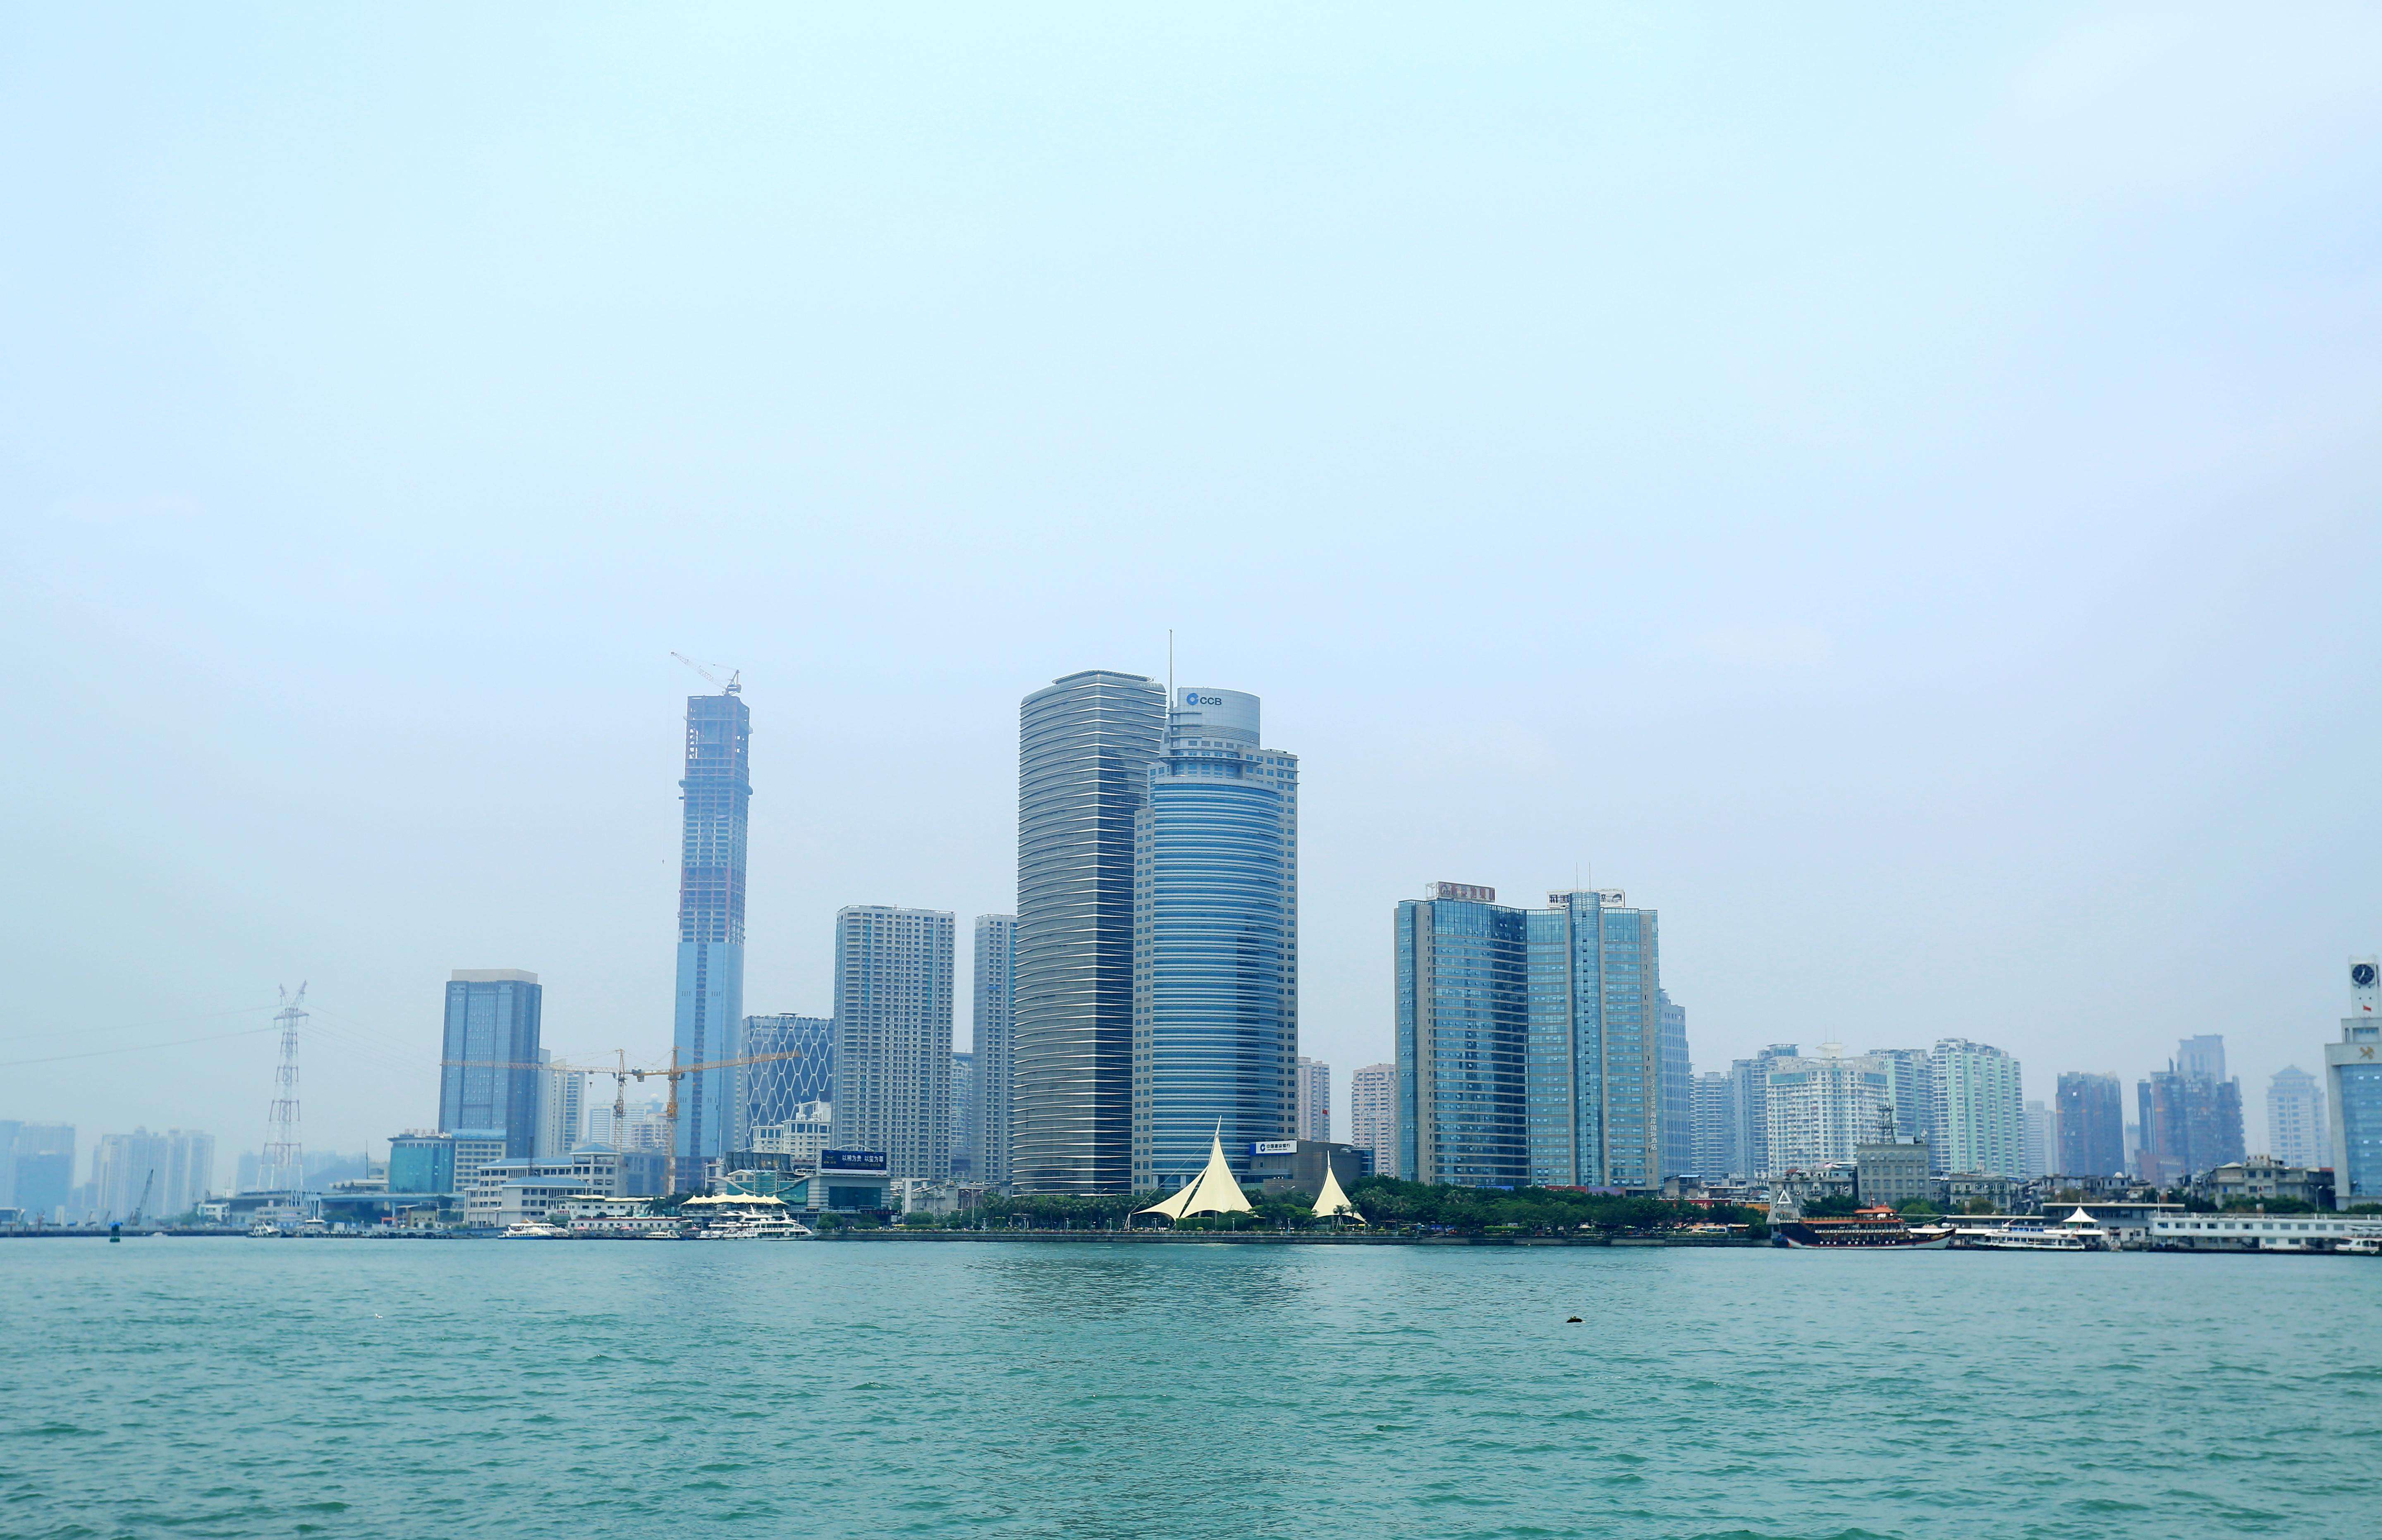 As a transport hub, Xiamen is poised to be a major player in all means of trade. Photo: ImagineChina